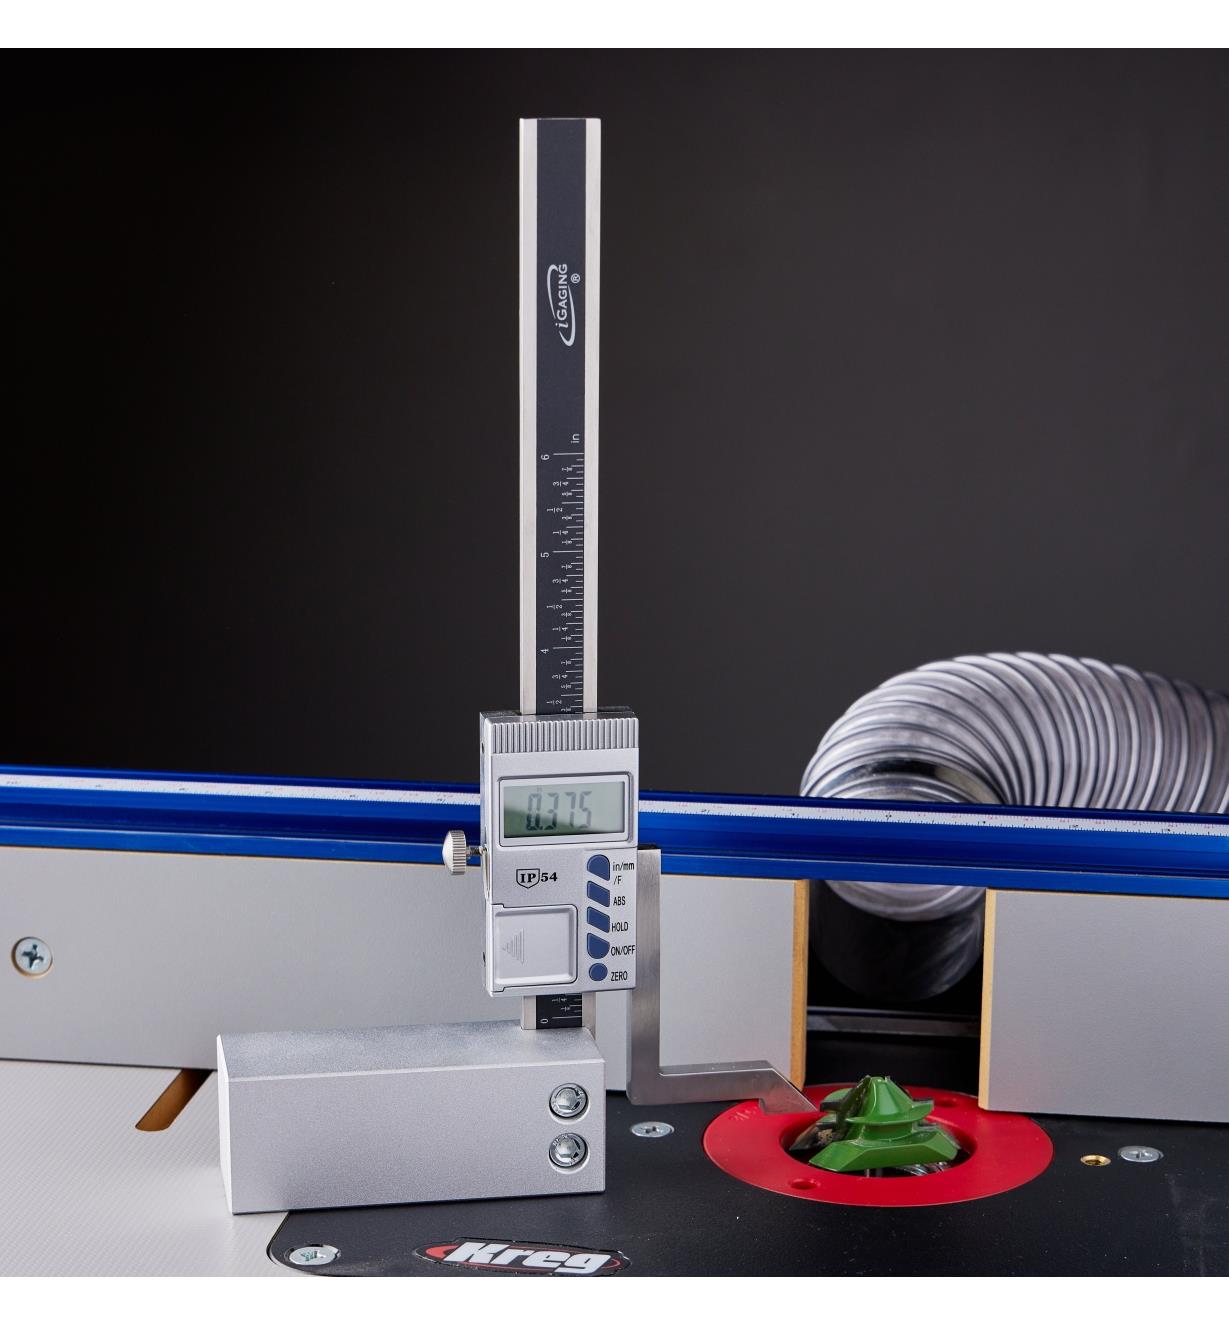 A digital height gauge sits on a router table and measures the height of a router bit